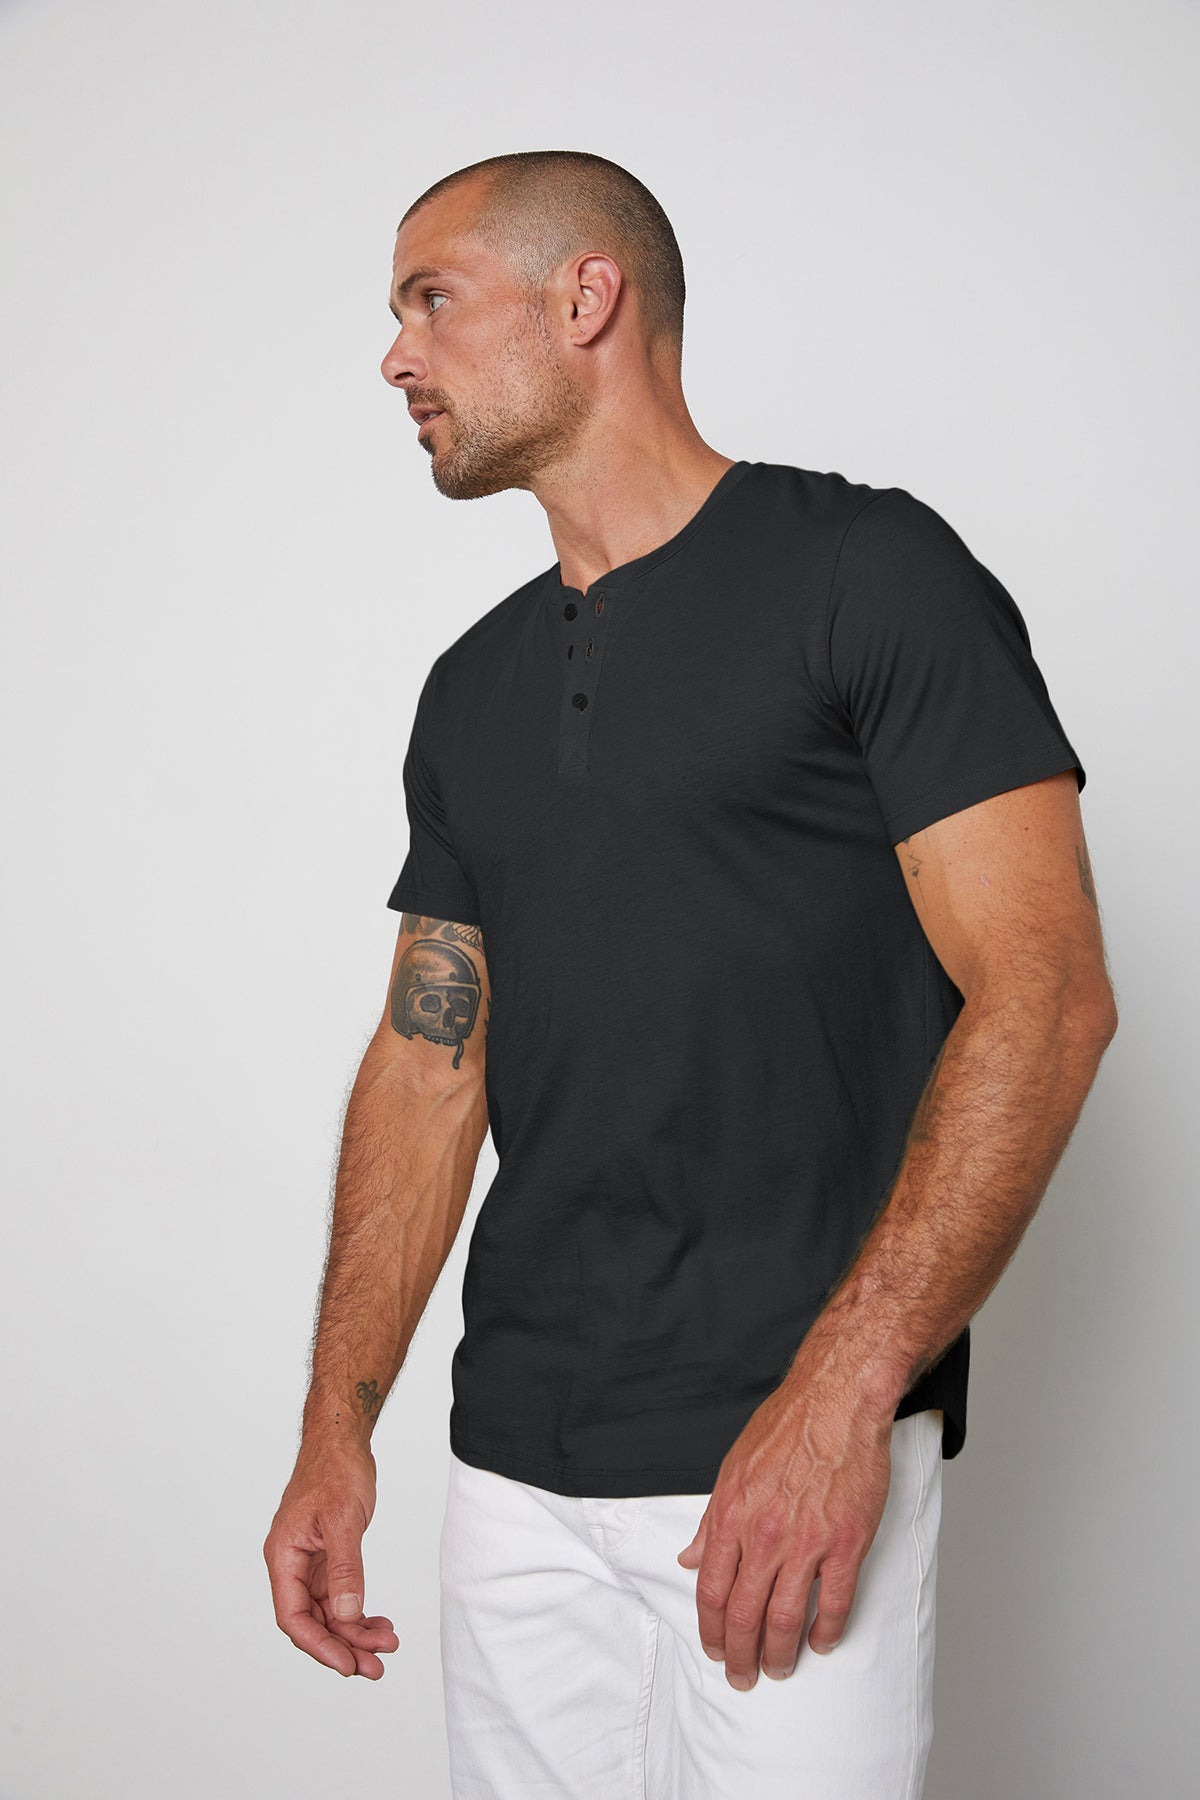   A man in a black Velvet by Graham & Spencer Fulton Henley and white pants, looking to the side, displaying a tattoo on his left arm against a plain background. 